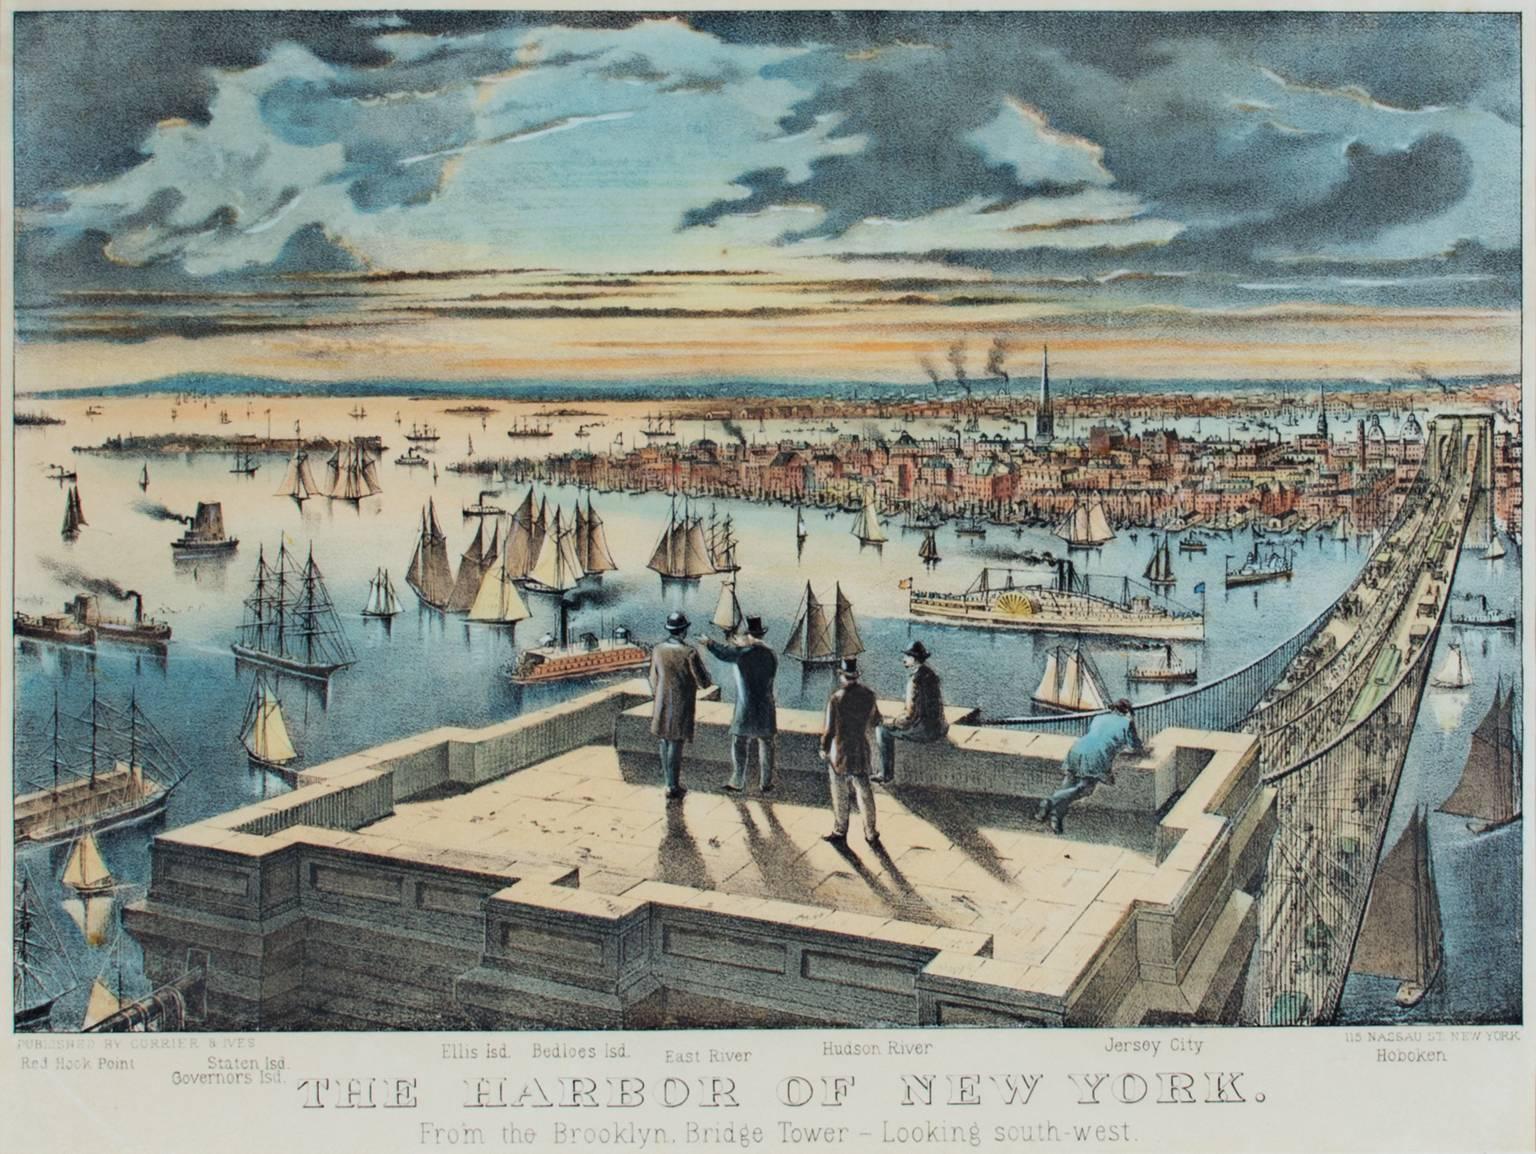 Currier & Ives Landscape Print - "The Harbor of New York, From the Brooklyn Bridge Looking Southwest, " lithograph